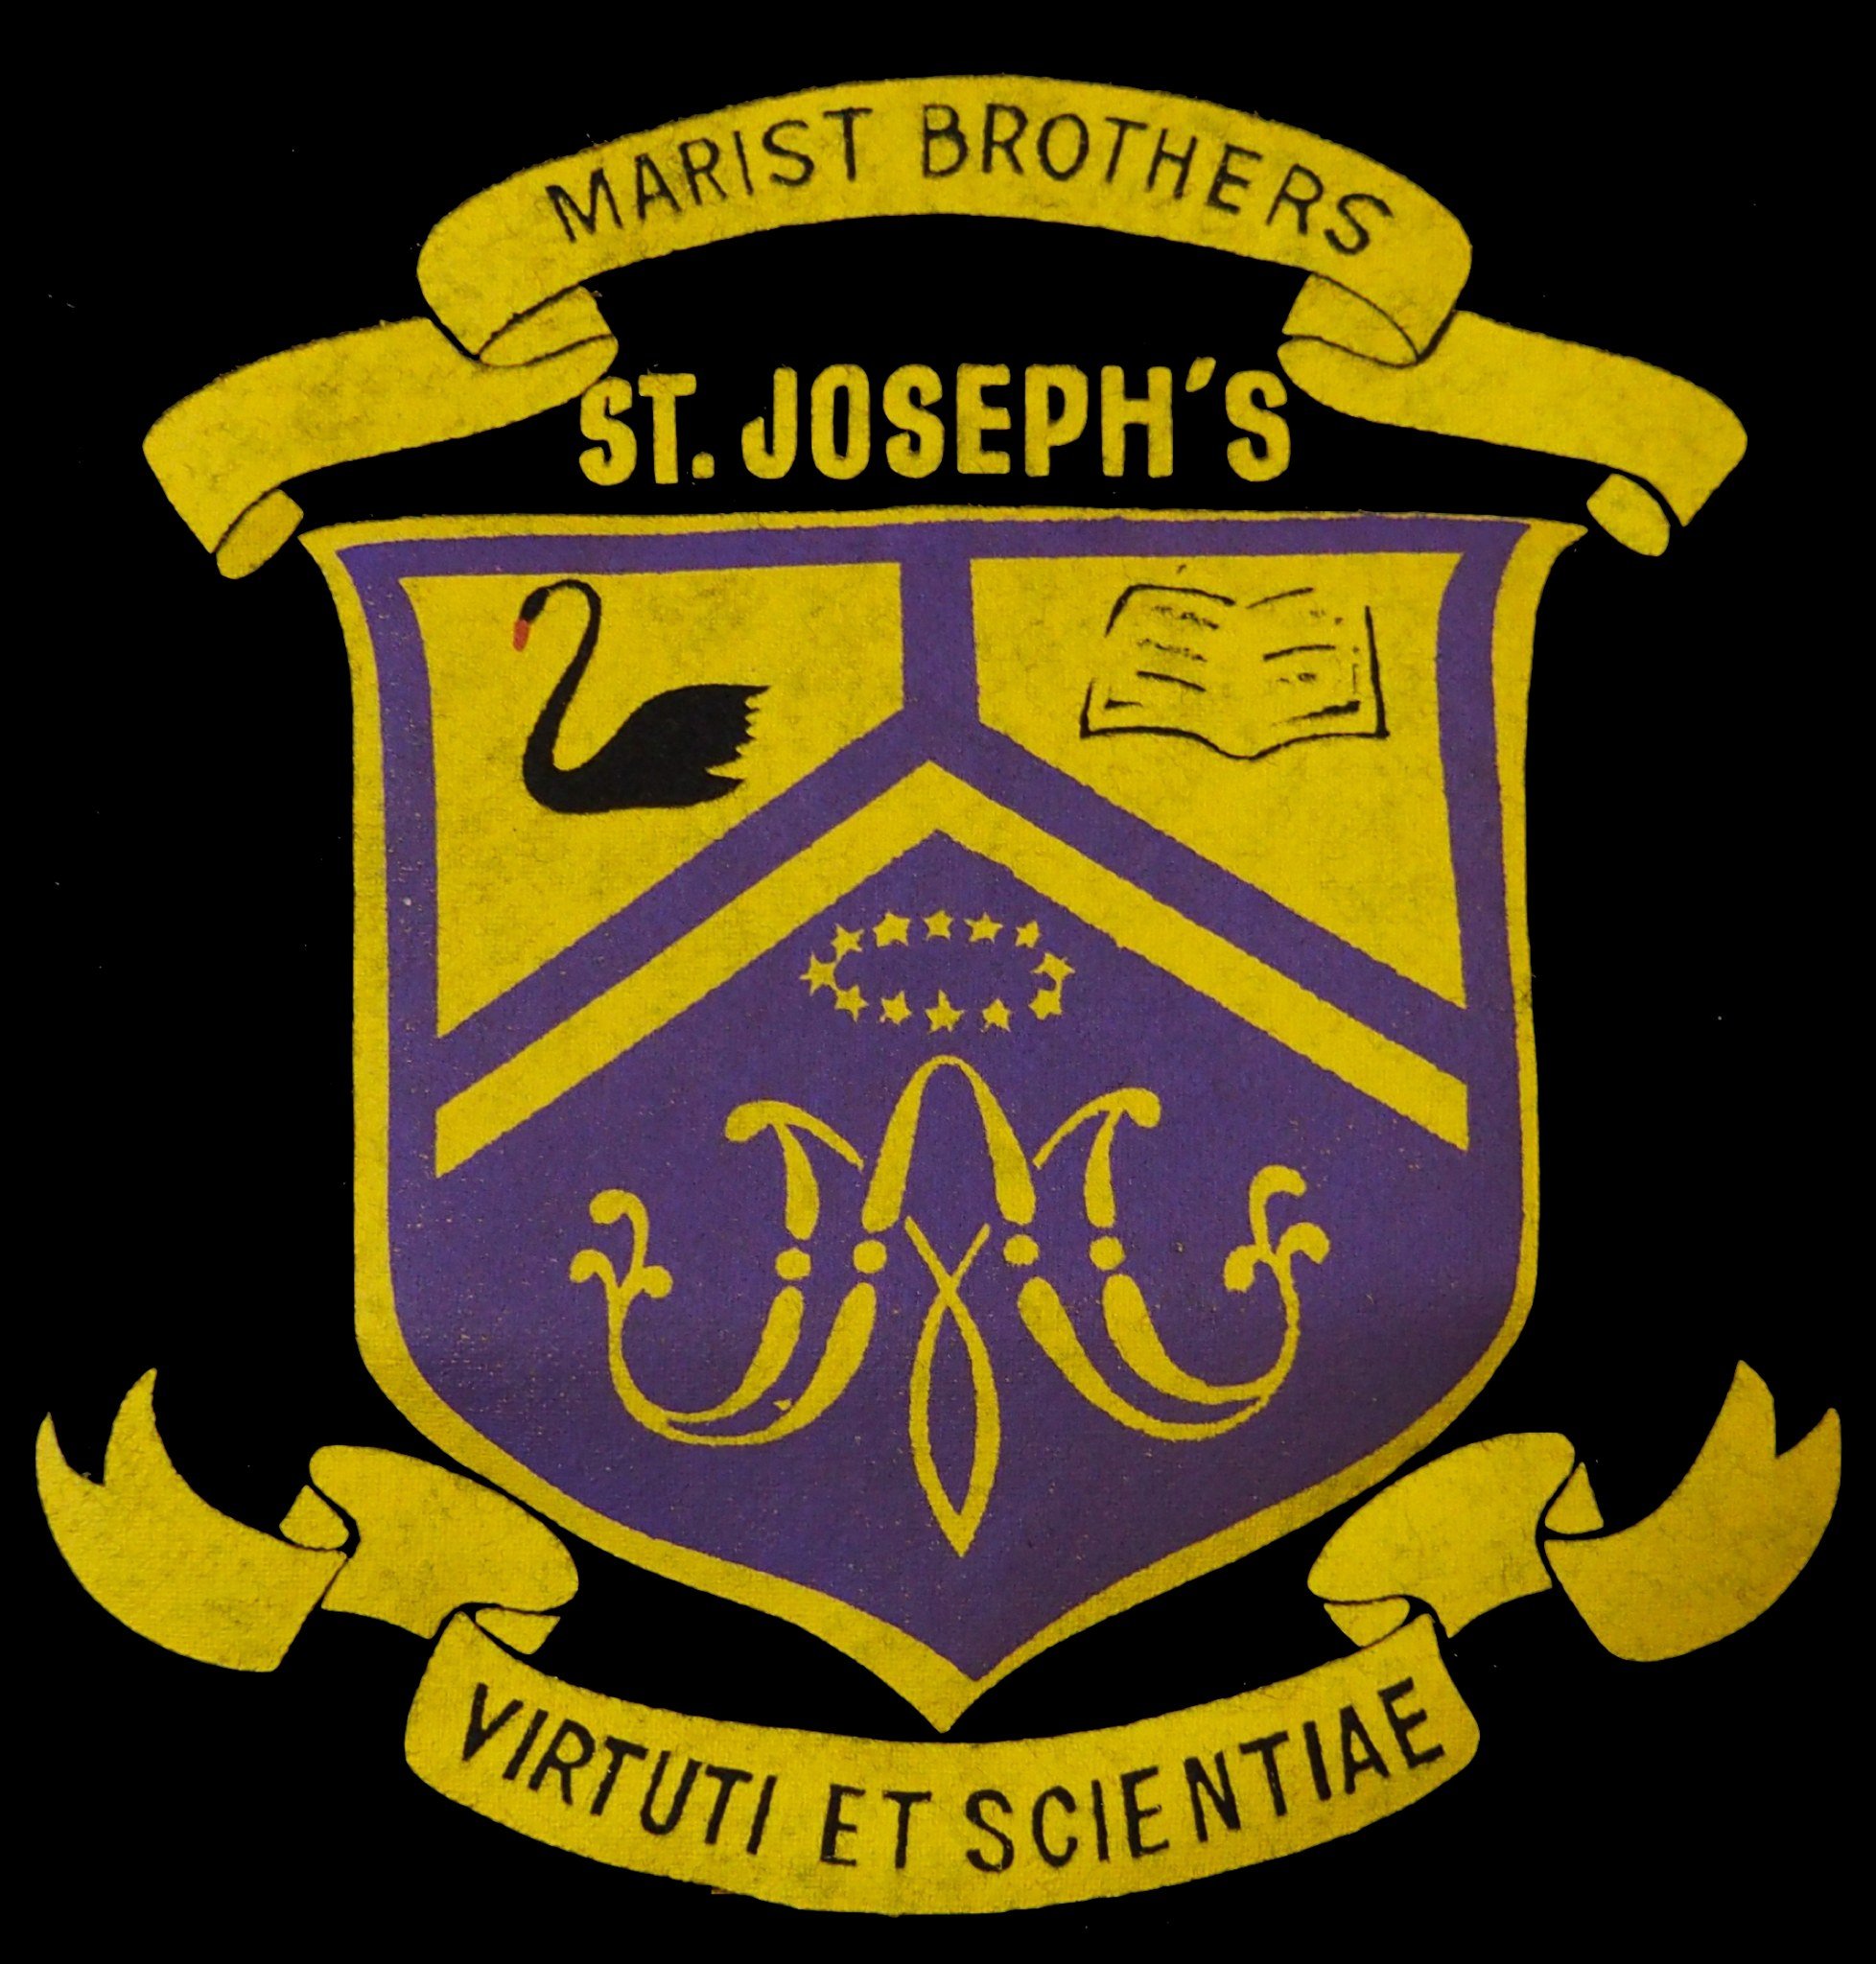  The beautiful St Joseph's College crest of purple and gold, and the reason the boys were often referred to as the 'Violet Crumbles'. 